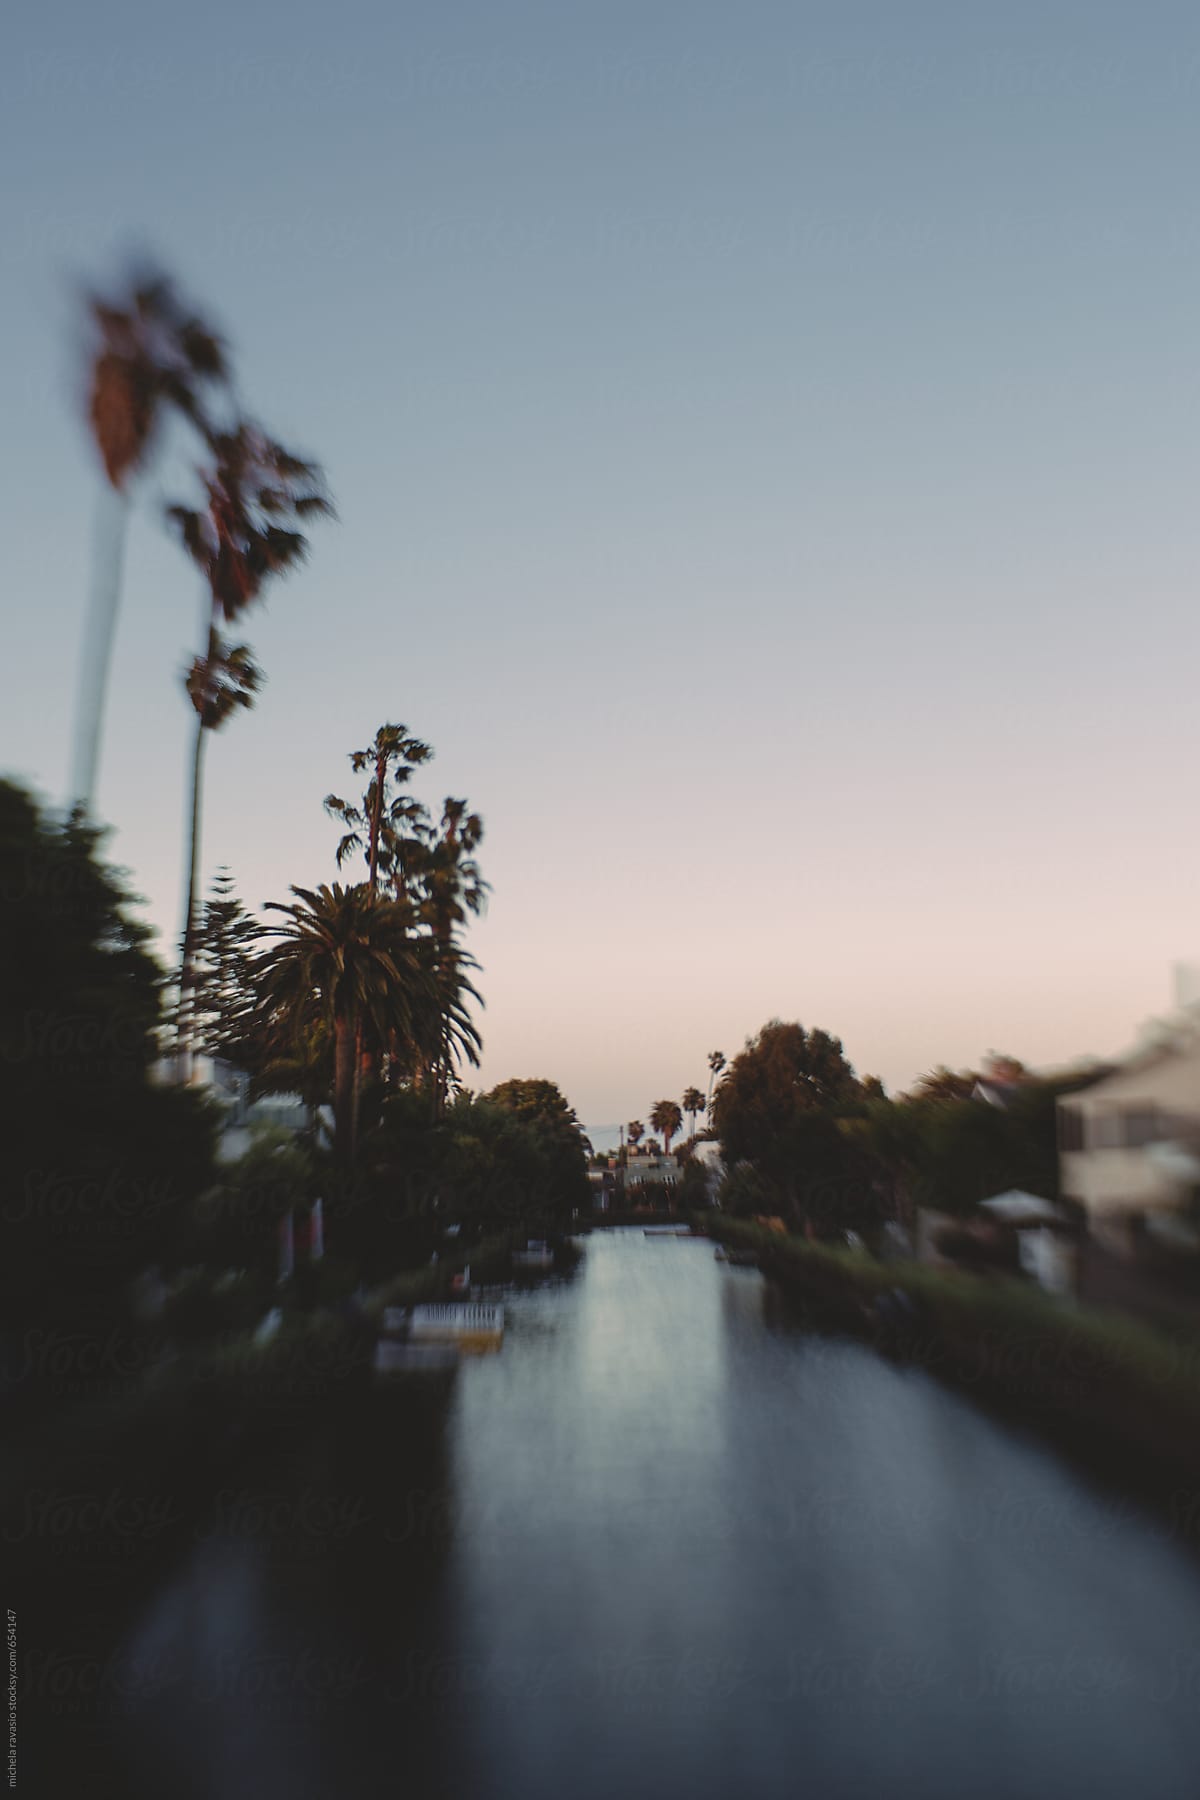 Canal in Venice, Los Angeles